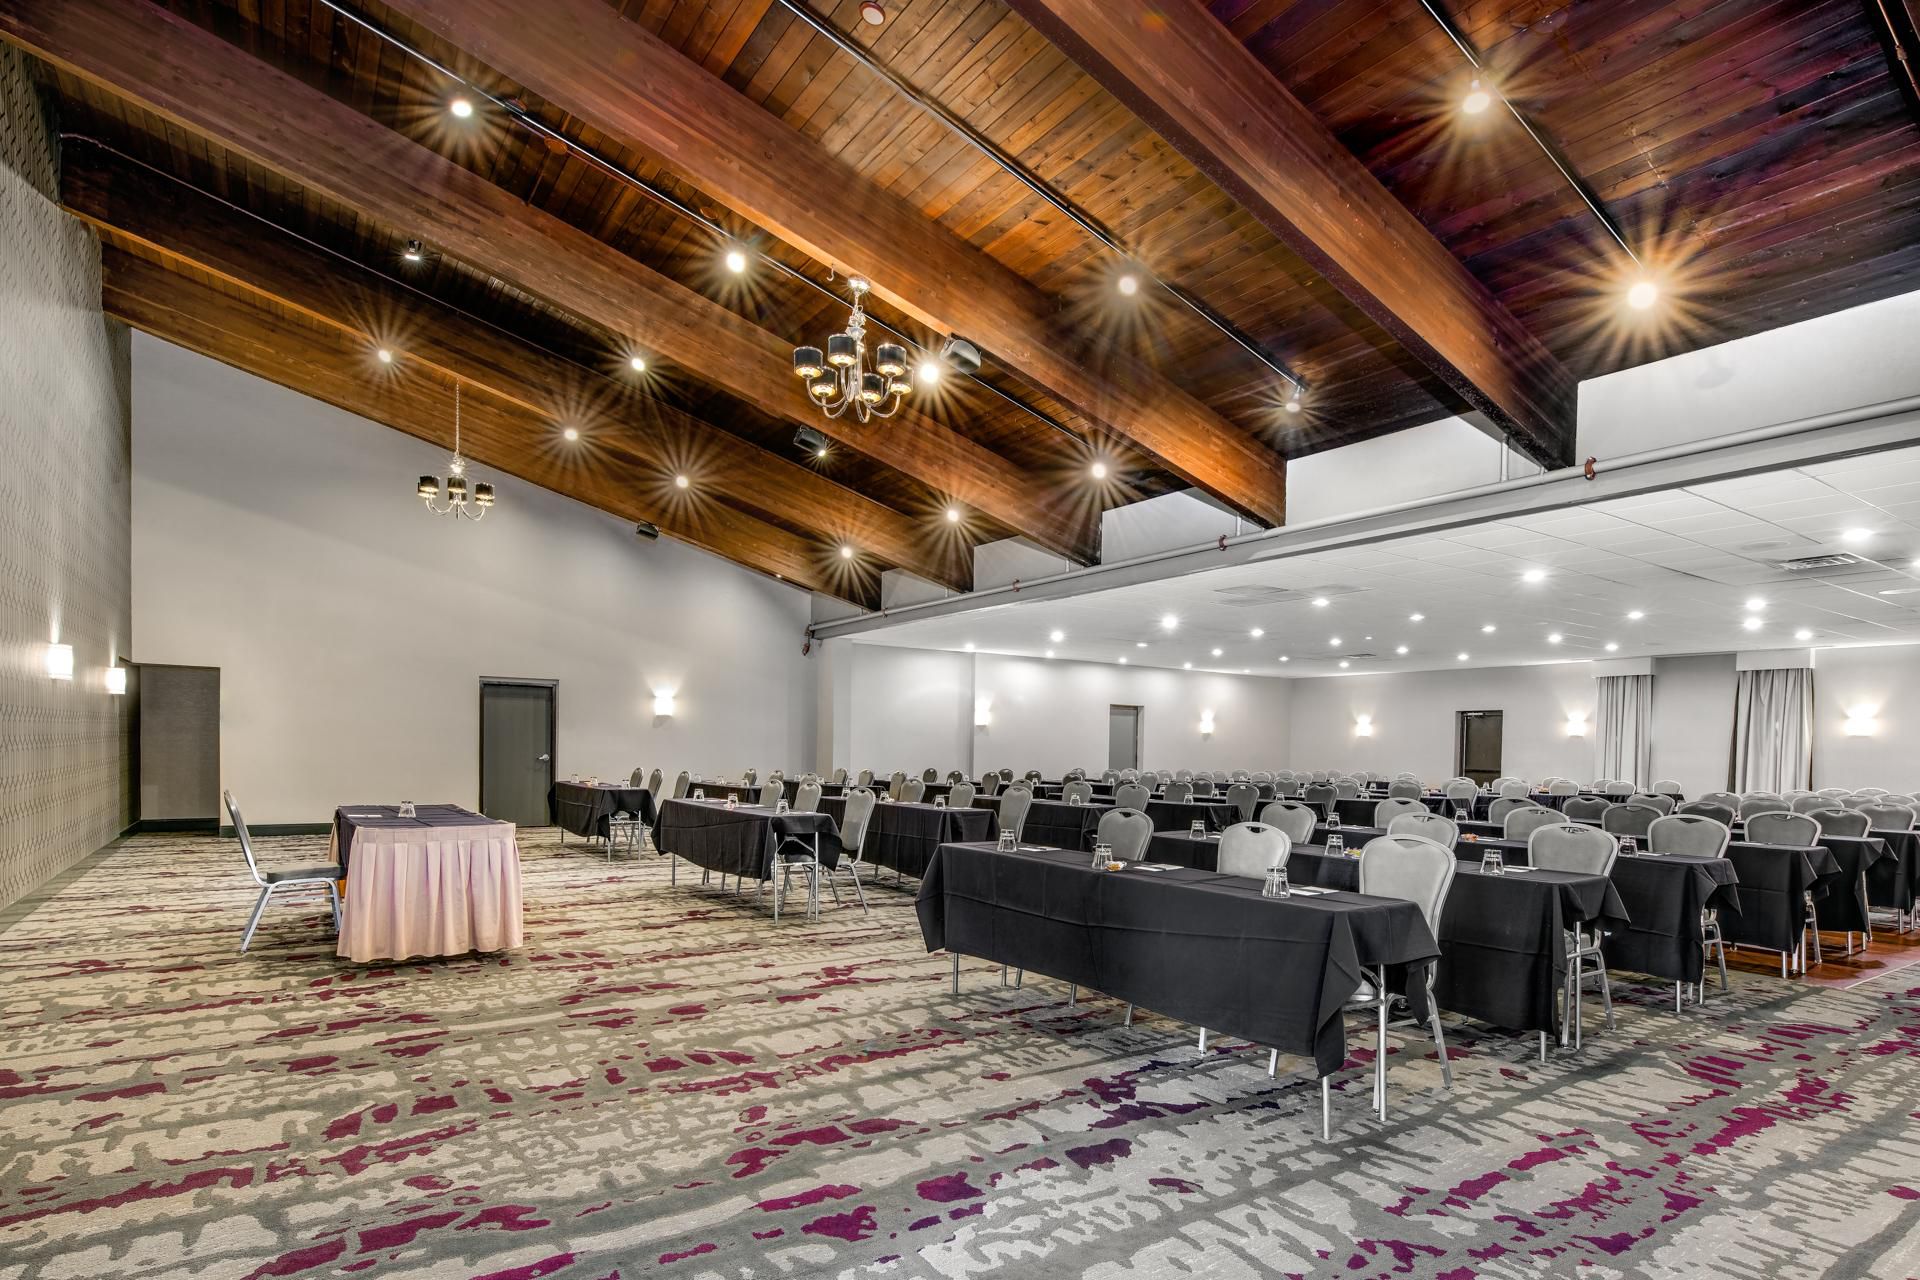 Our Voyager Ballroom is the perfect venue for any event.